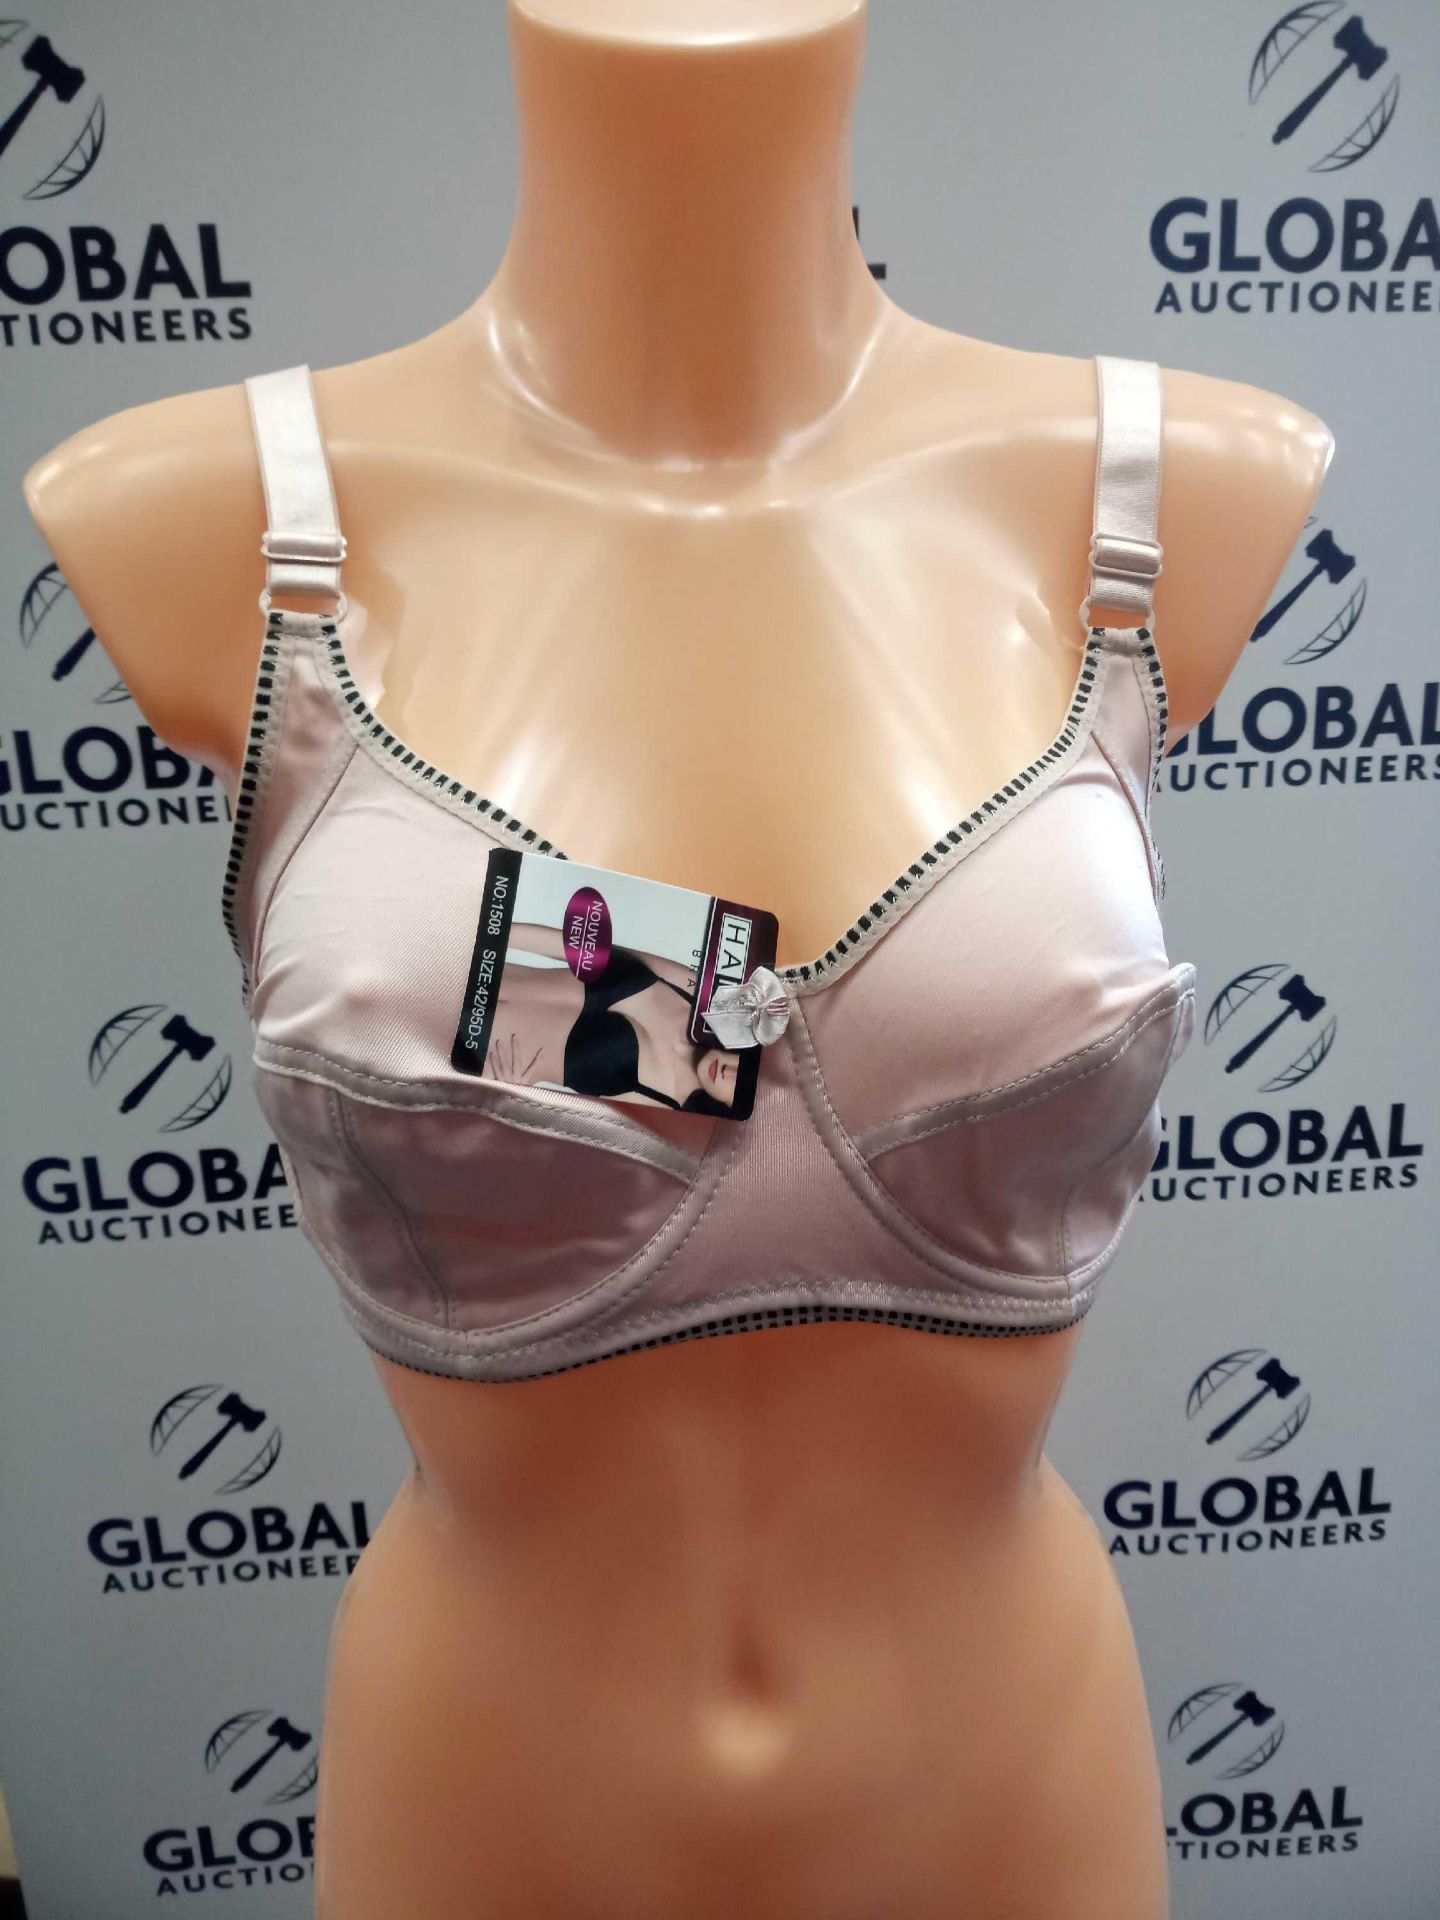 Combined Rrp £240 Lot To Contain 24 Hana Biege 1508 Ladies Bra